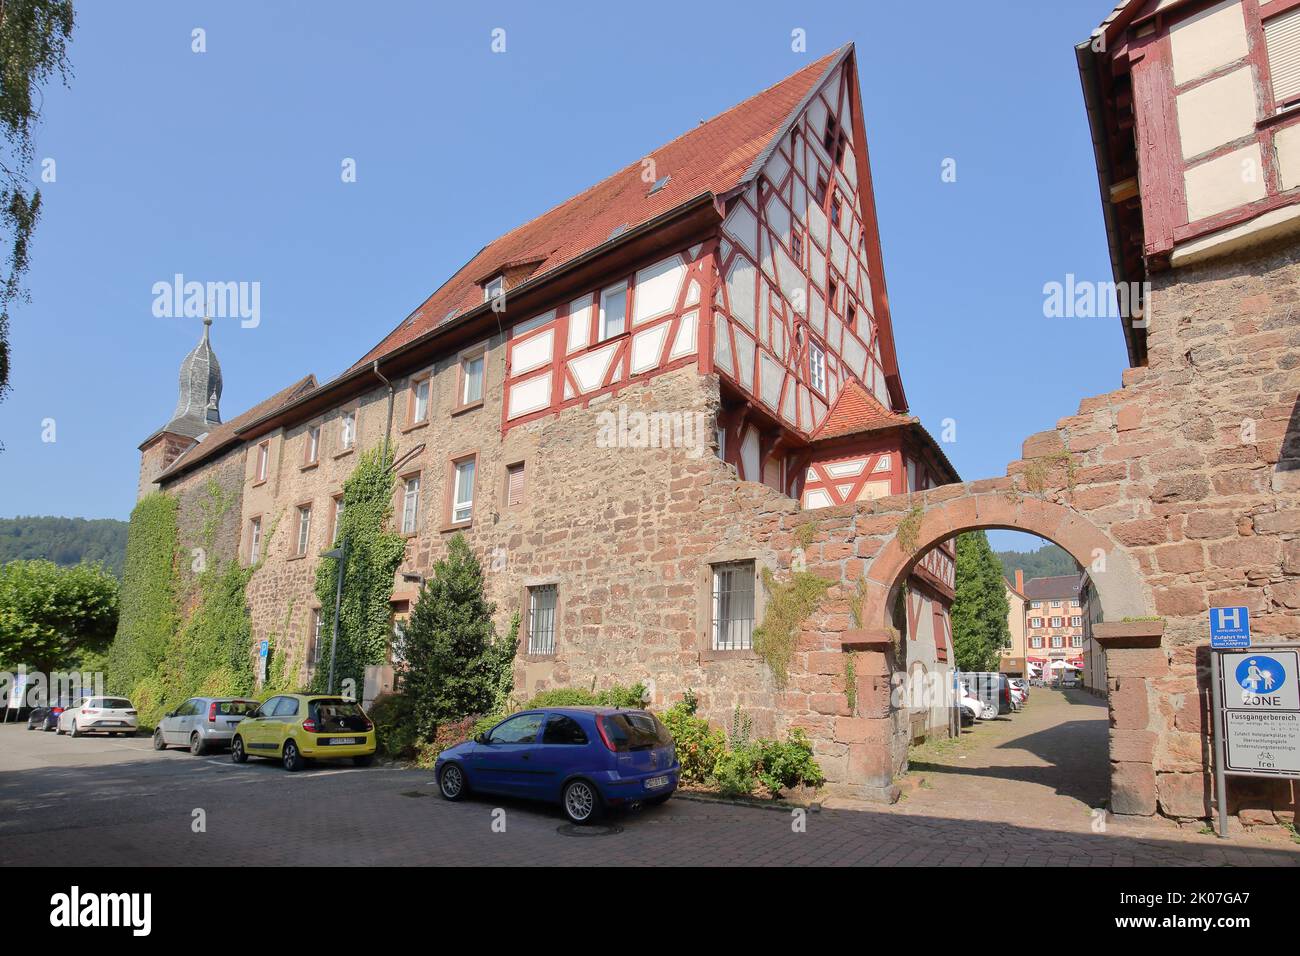 Historic town wall with blue hat and half-timbered house in Eberbach, Neckar Valley, Baden-Wuerttemberg, Germany Stock Photo